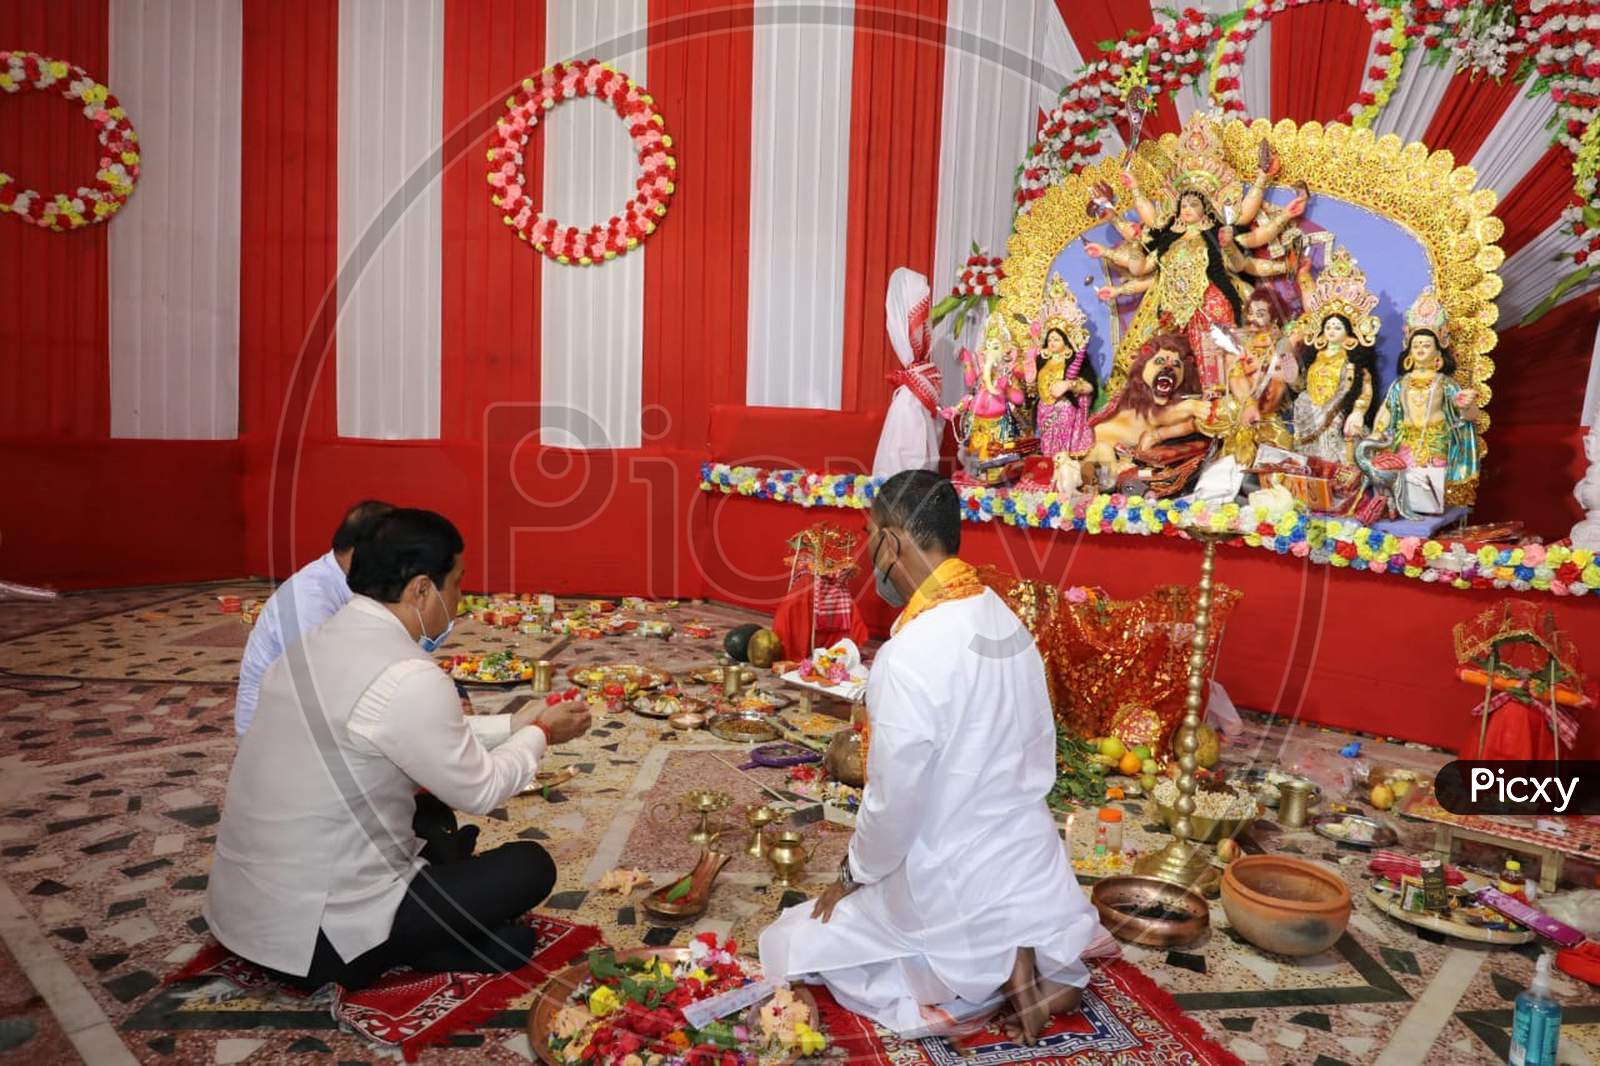 Assam Chief Minister Sarbananda Sonowal  visit  community puja  pandal  in Guwahati on Oct 25,2020.